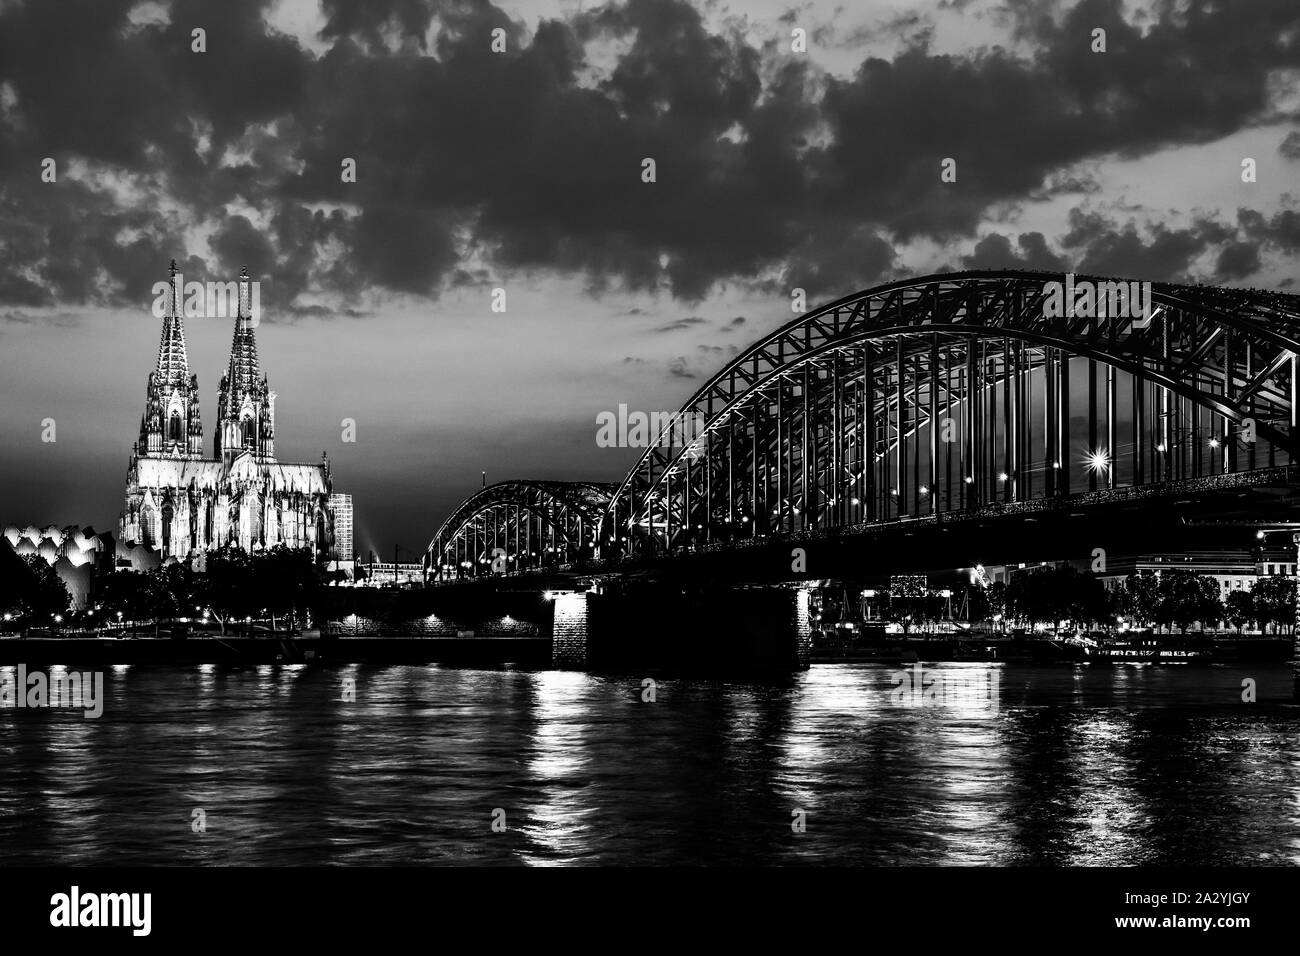 Cologne, Germany: Beautiful black and white night landscape of the gothic cathedral, Hohenzollern Bridge and reflections over the River Rhine with clo Stock Photo